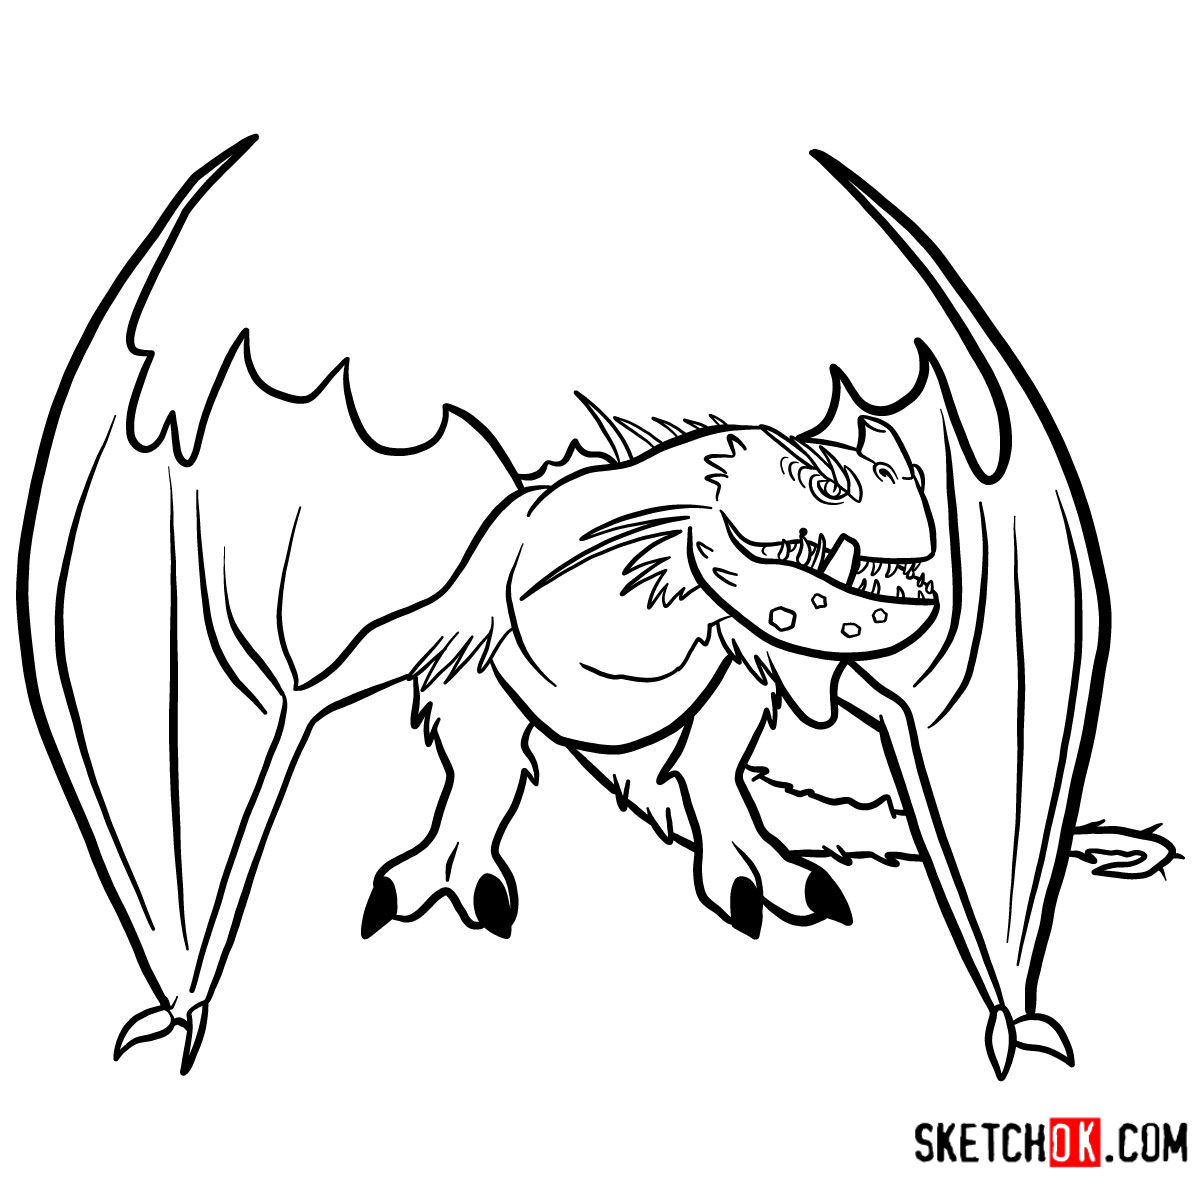 How To Draw The Snow Wraith Dragon | How To Train Your Dragon